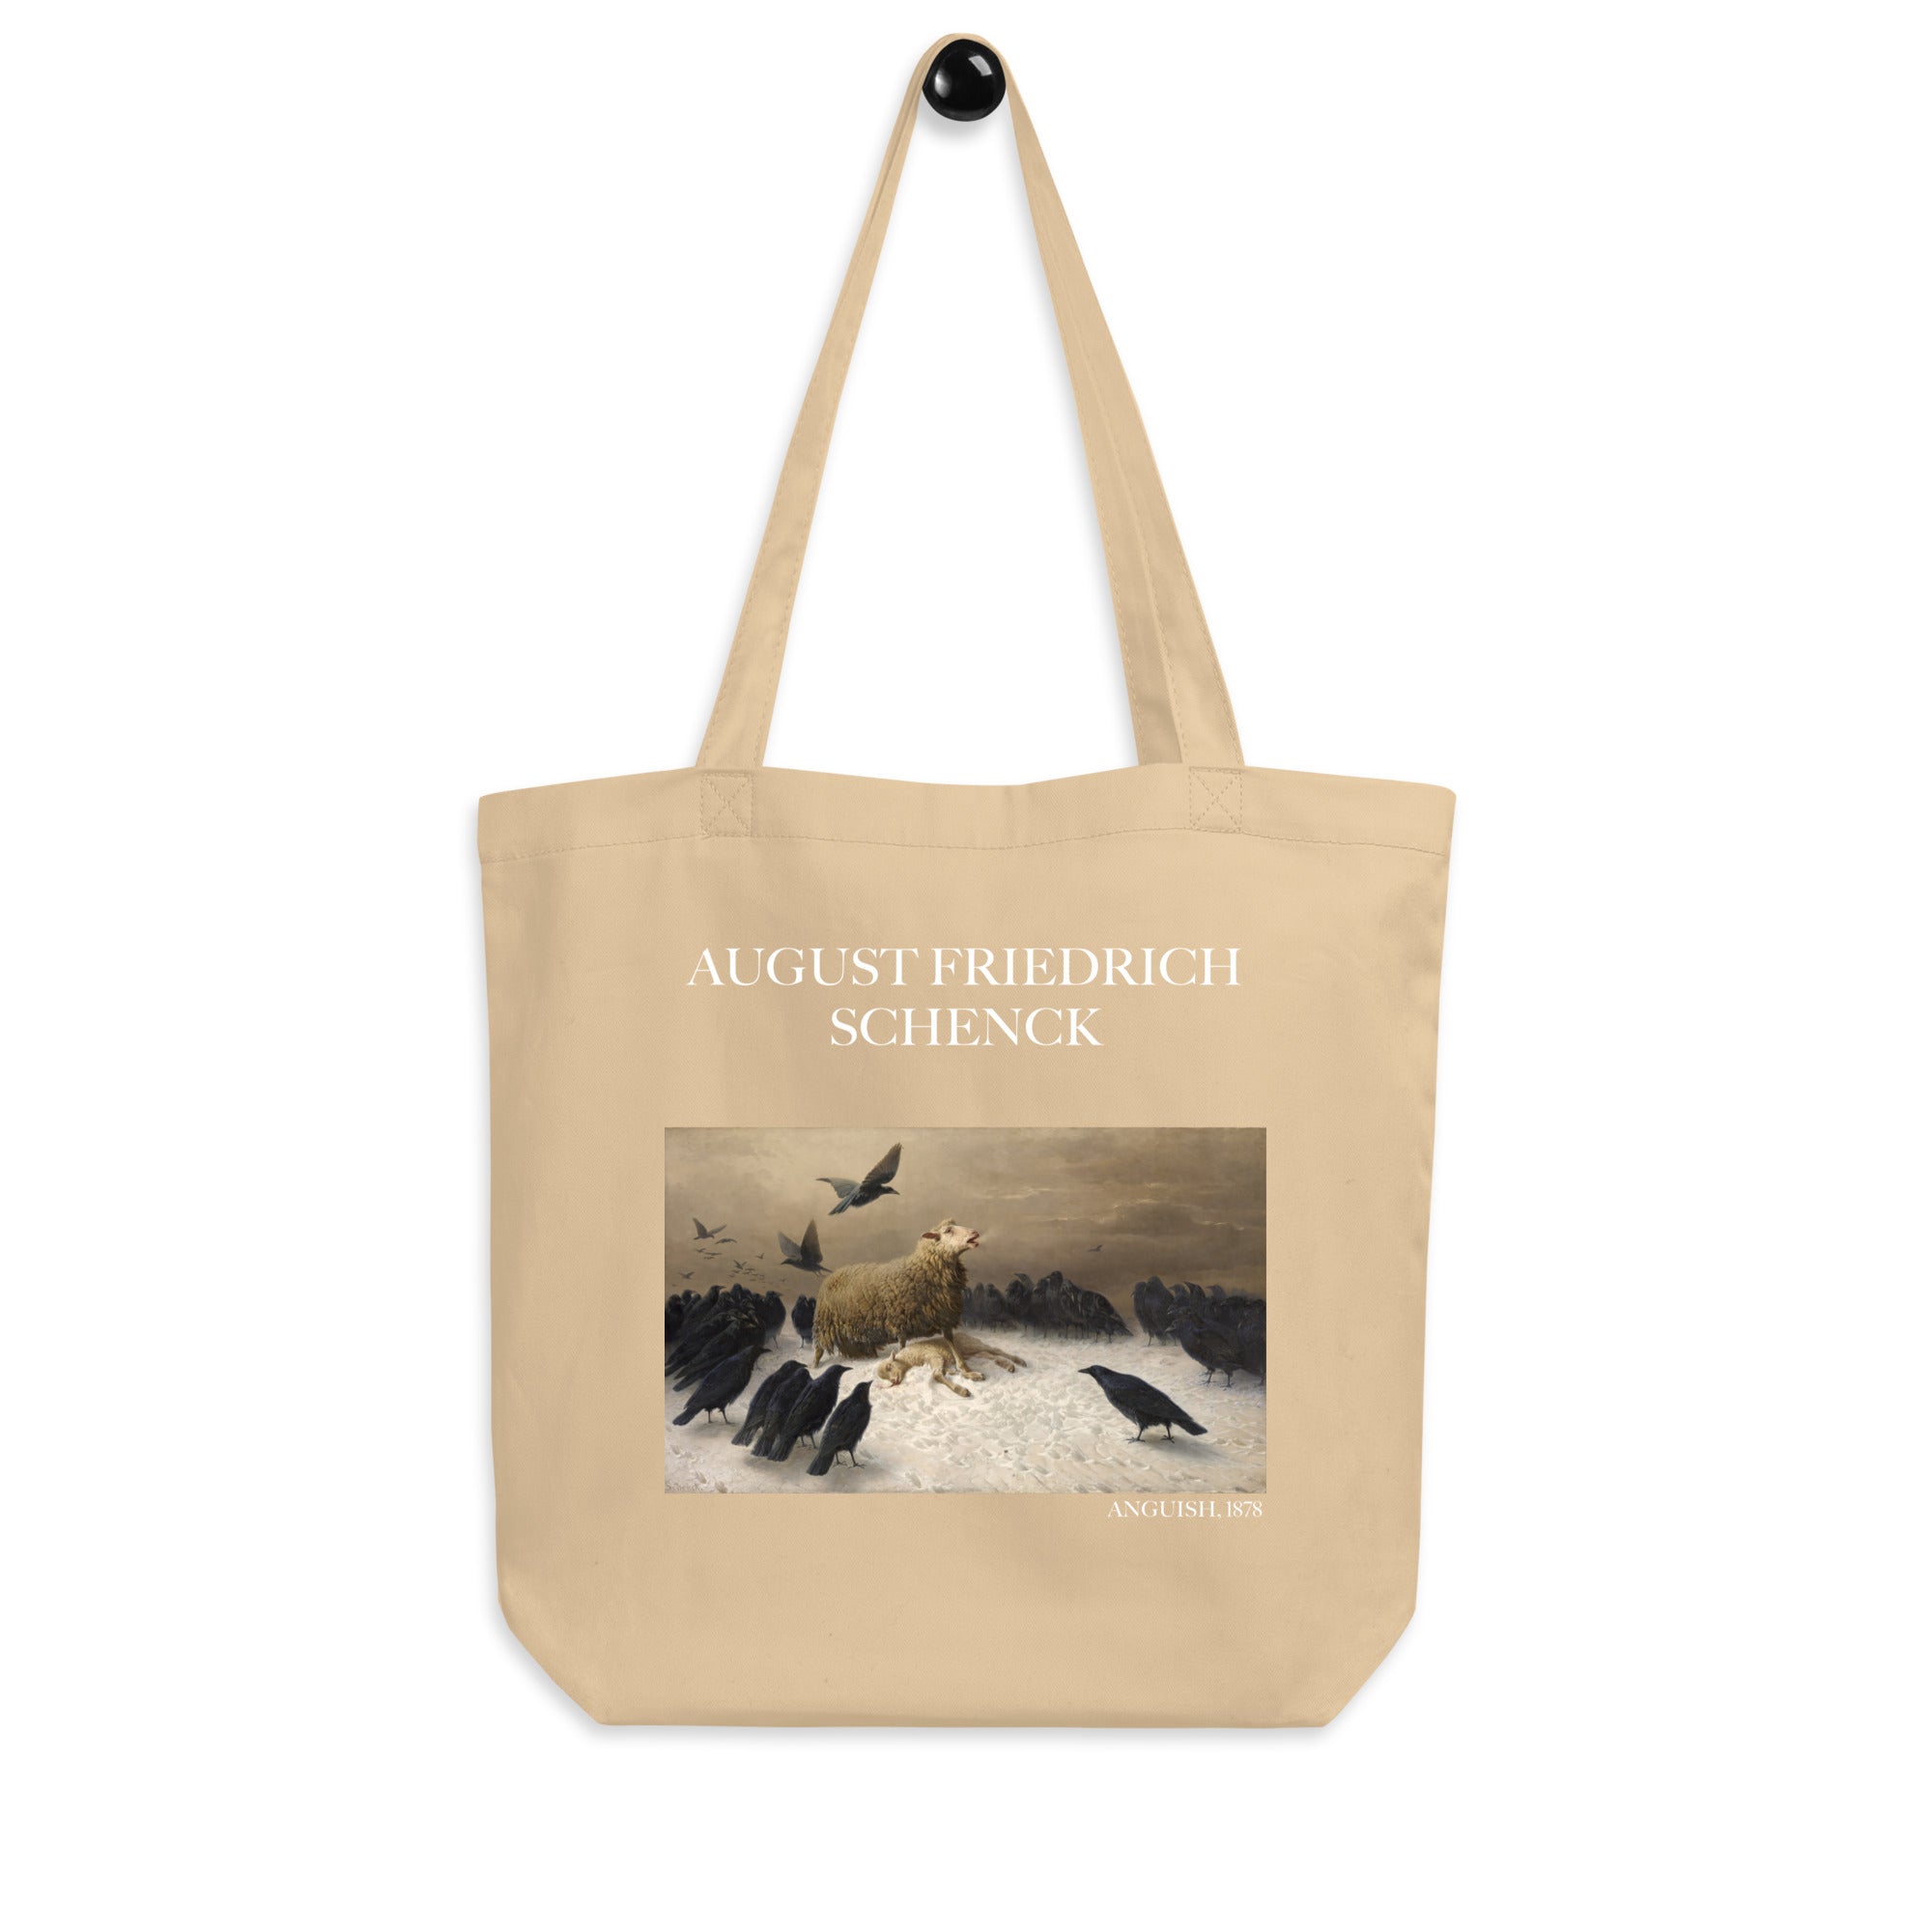 August Friedrich Schenck 'Anguish' Famous Painting Totebag | Eco Friendly Art Tote Bag